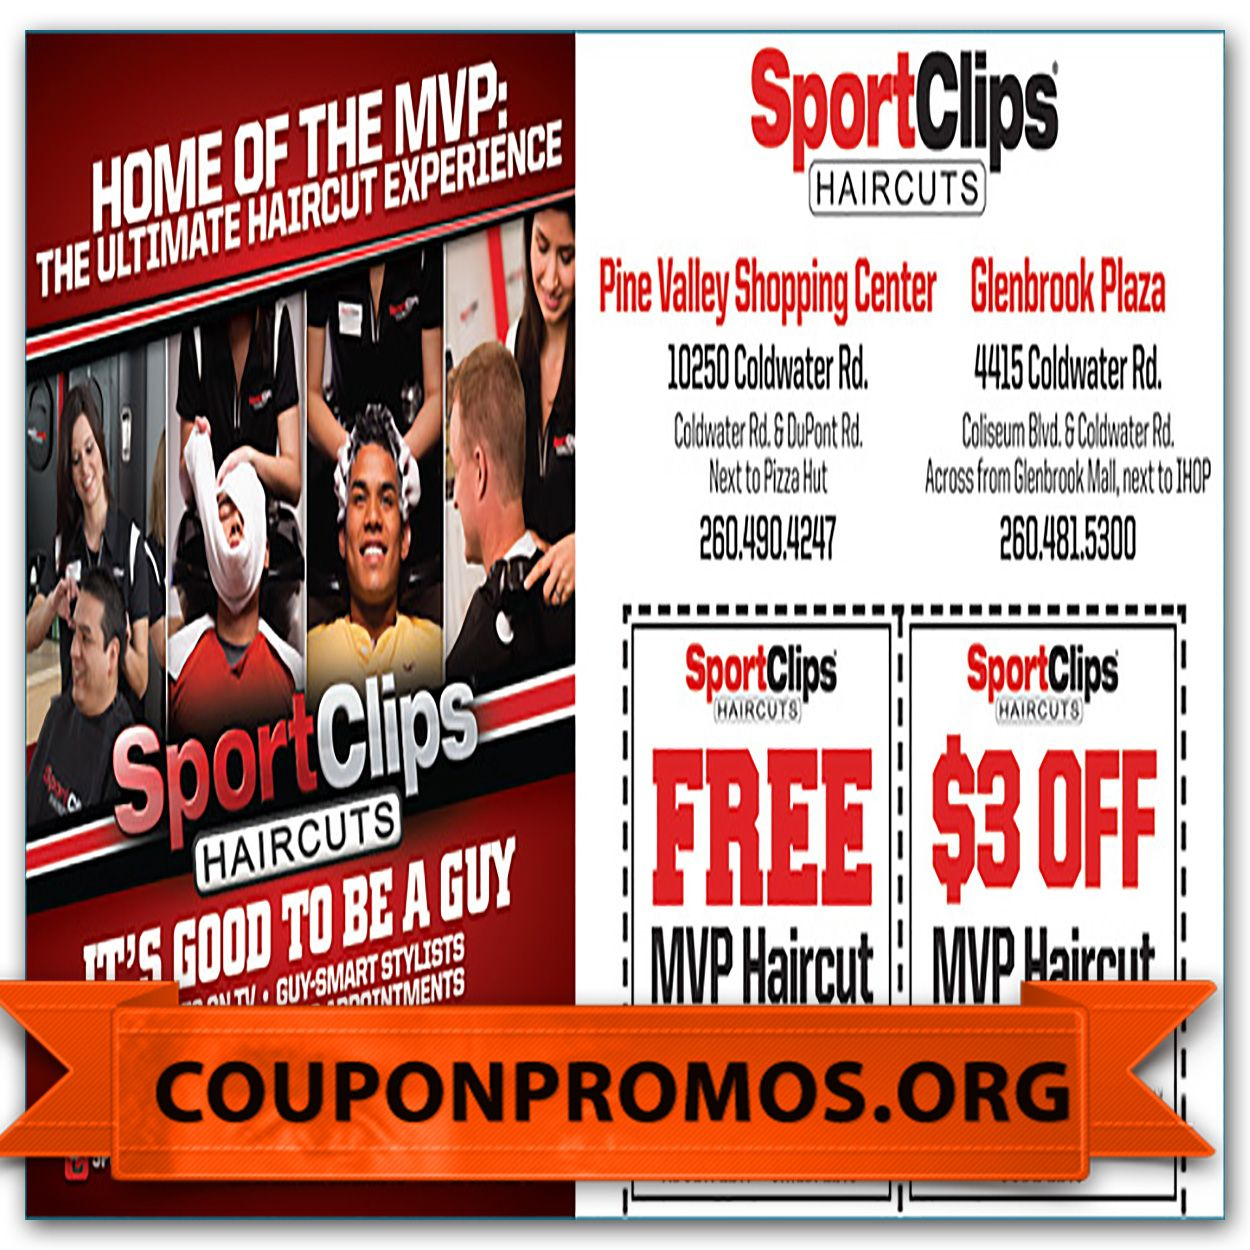 Sports Clips Coupon Printable For December | Sample Coupons For - Sports Clips Free Haircut Printable Coupon